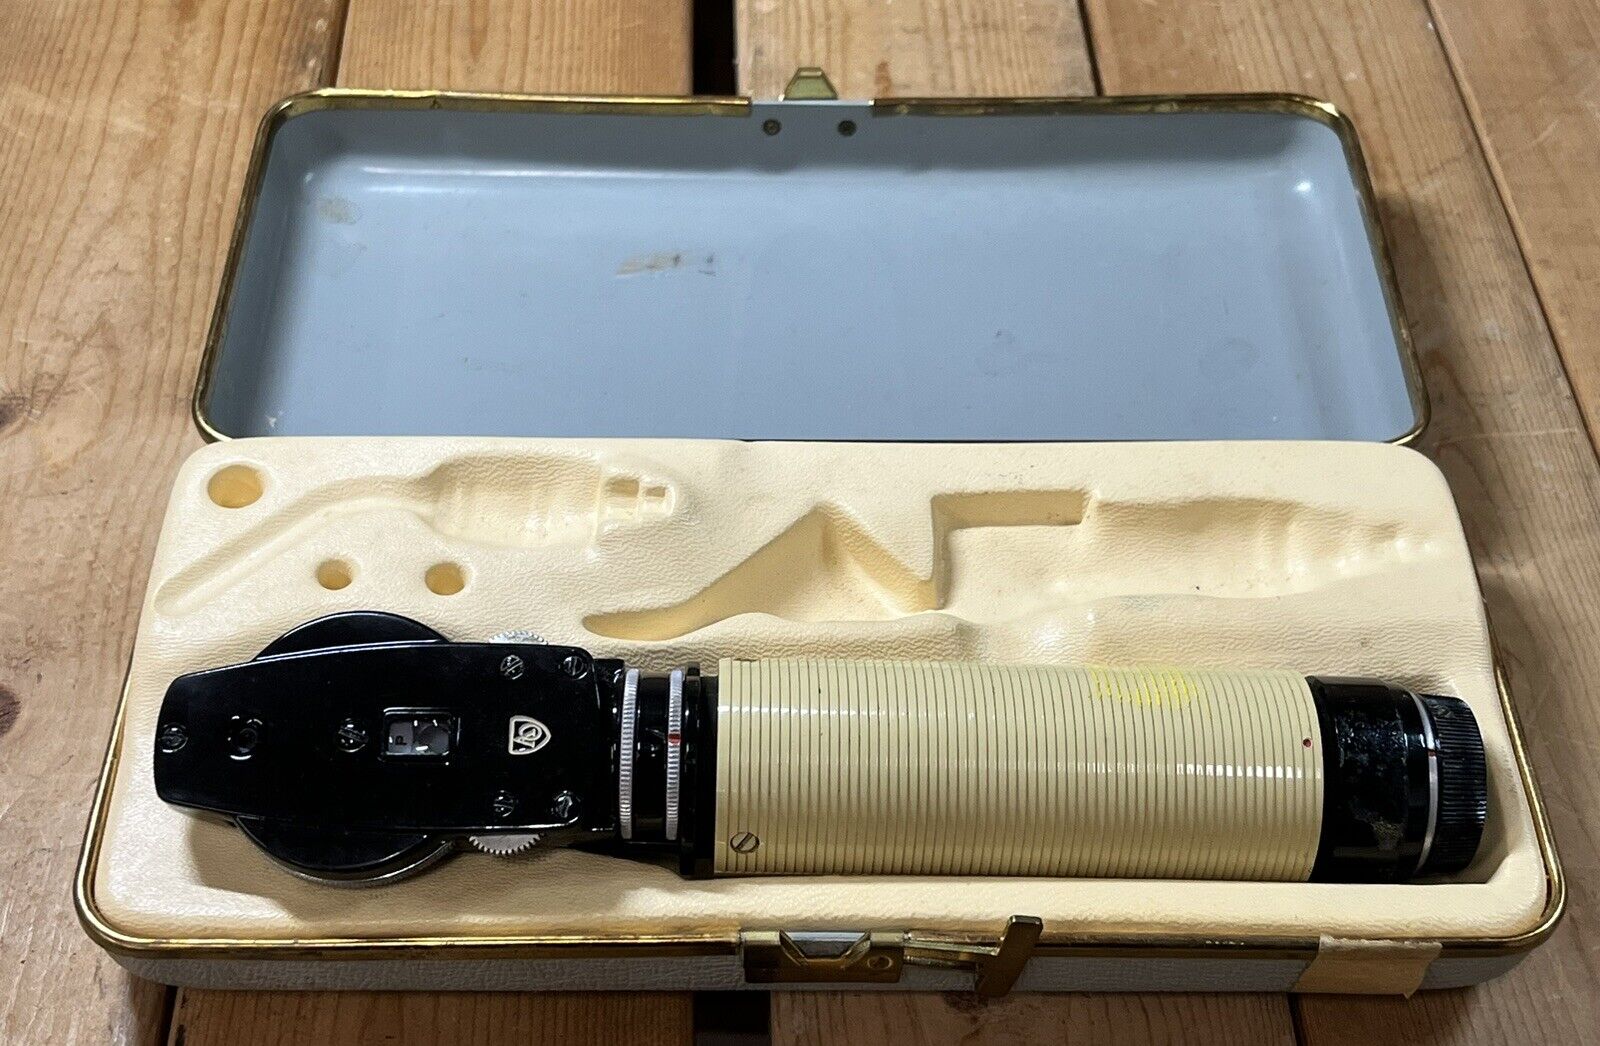 Vintage Opthalmoscope by American Optical “Giantscope” Model 7718 with Case